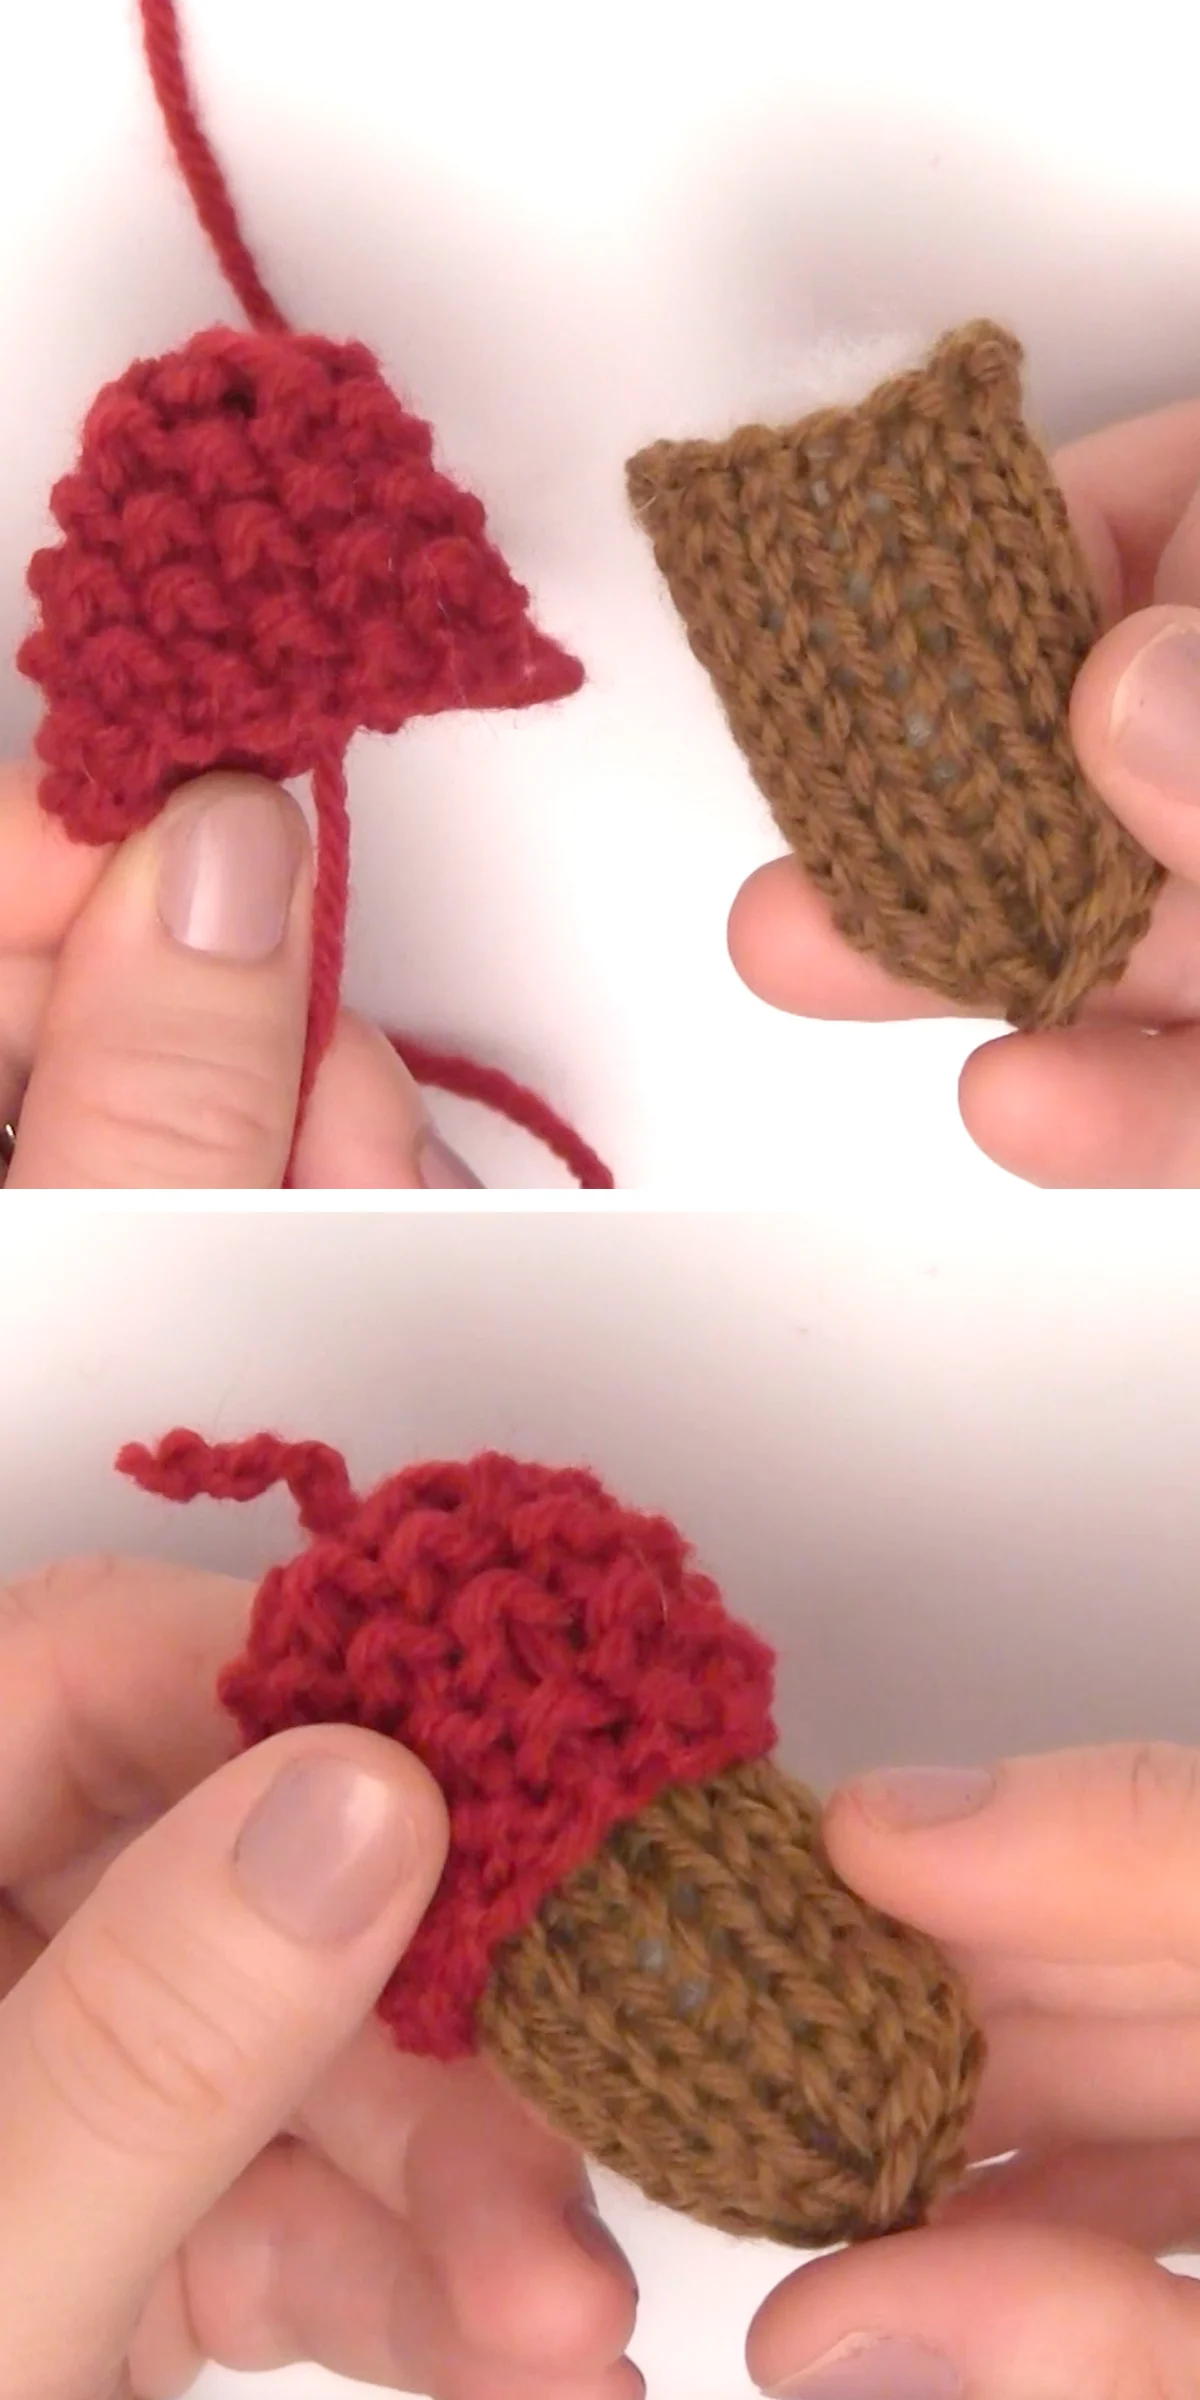 Attaching knitted body and cap of acorn softies.